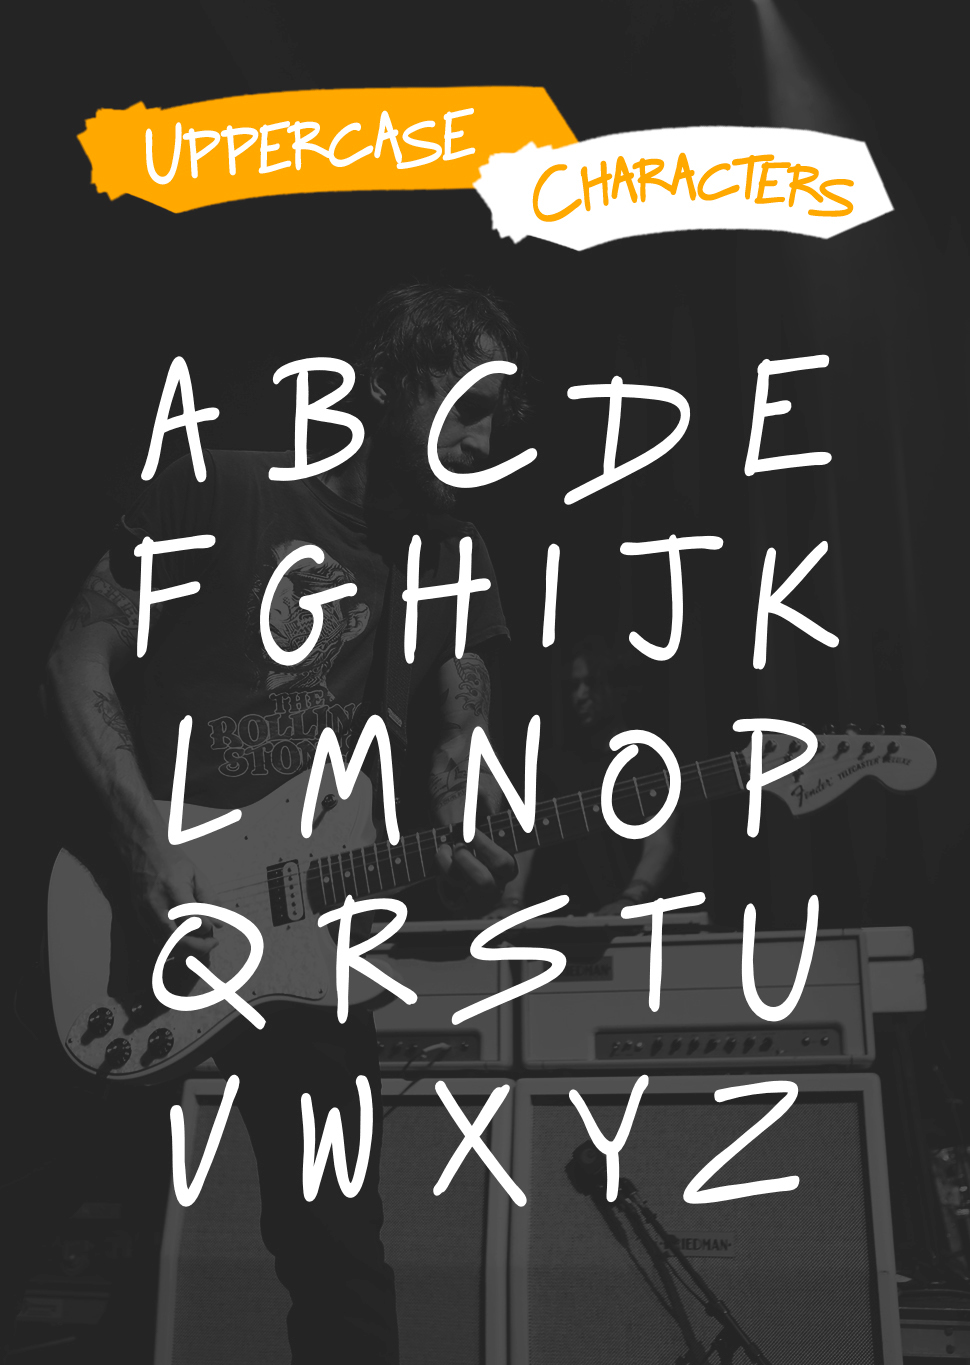 Raggedways free Typeface foo fighters handmade hand Dave Grohl Taylor Hawkins Nate Mendel Pat Smear Chris Shiflett download